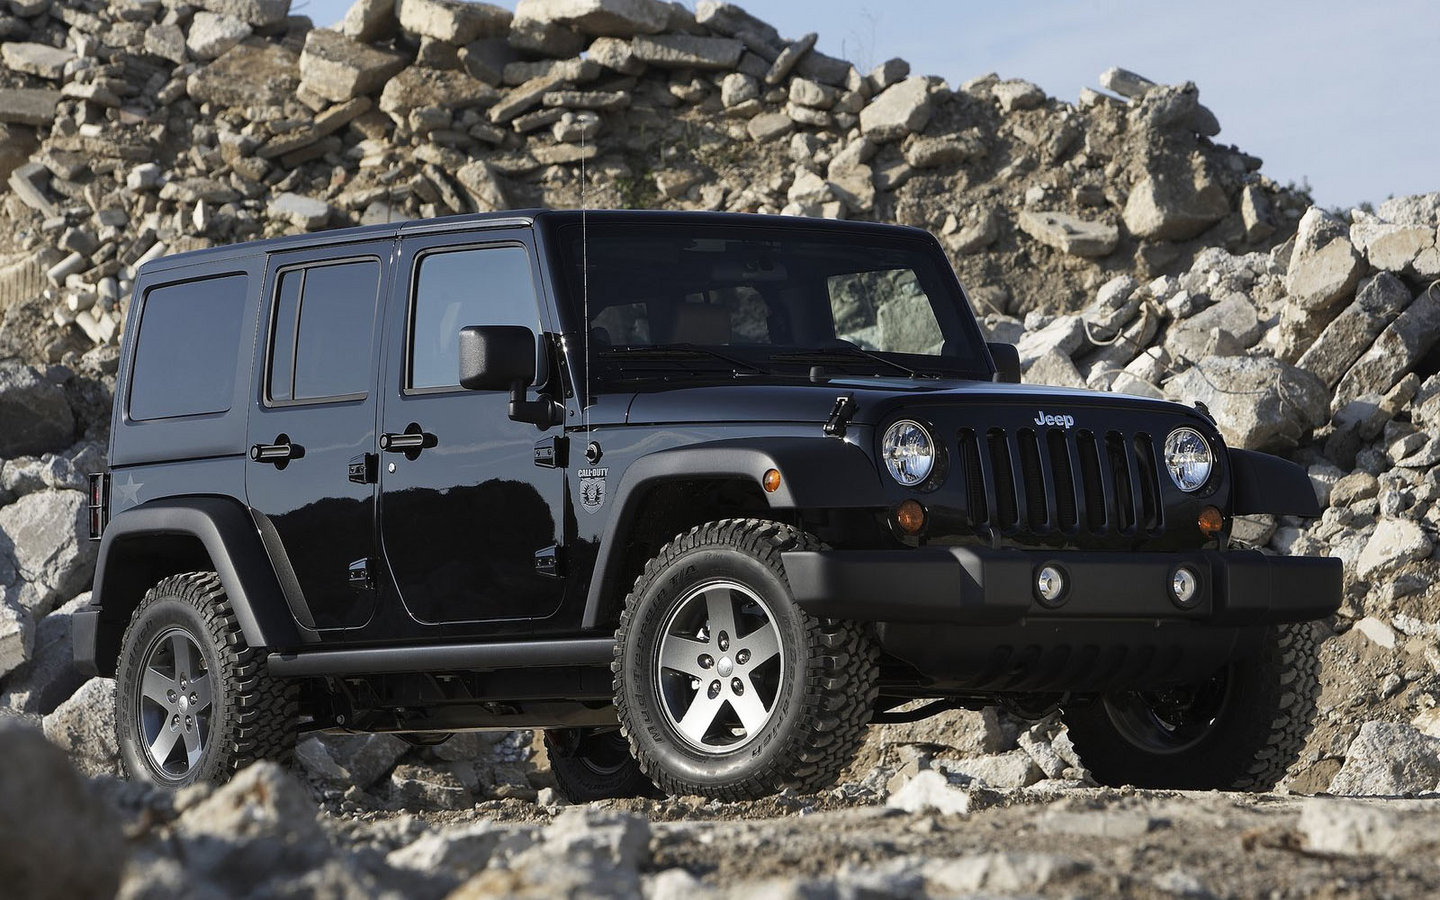 Cost of tires for jeep wrangler